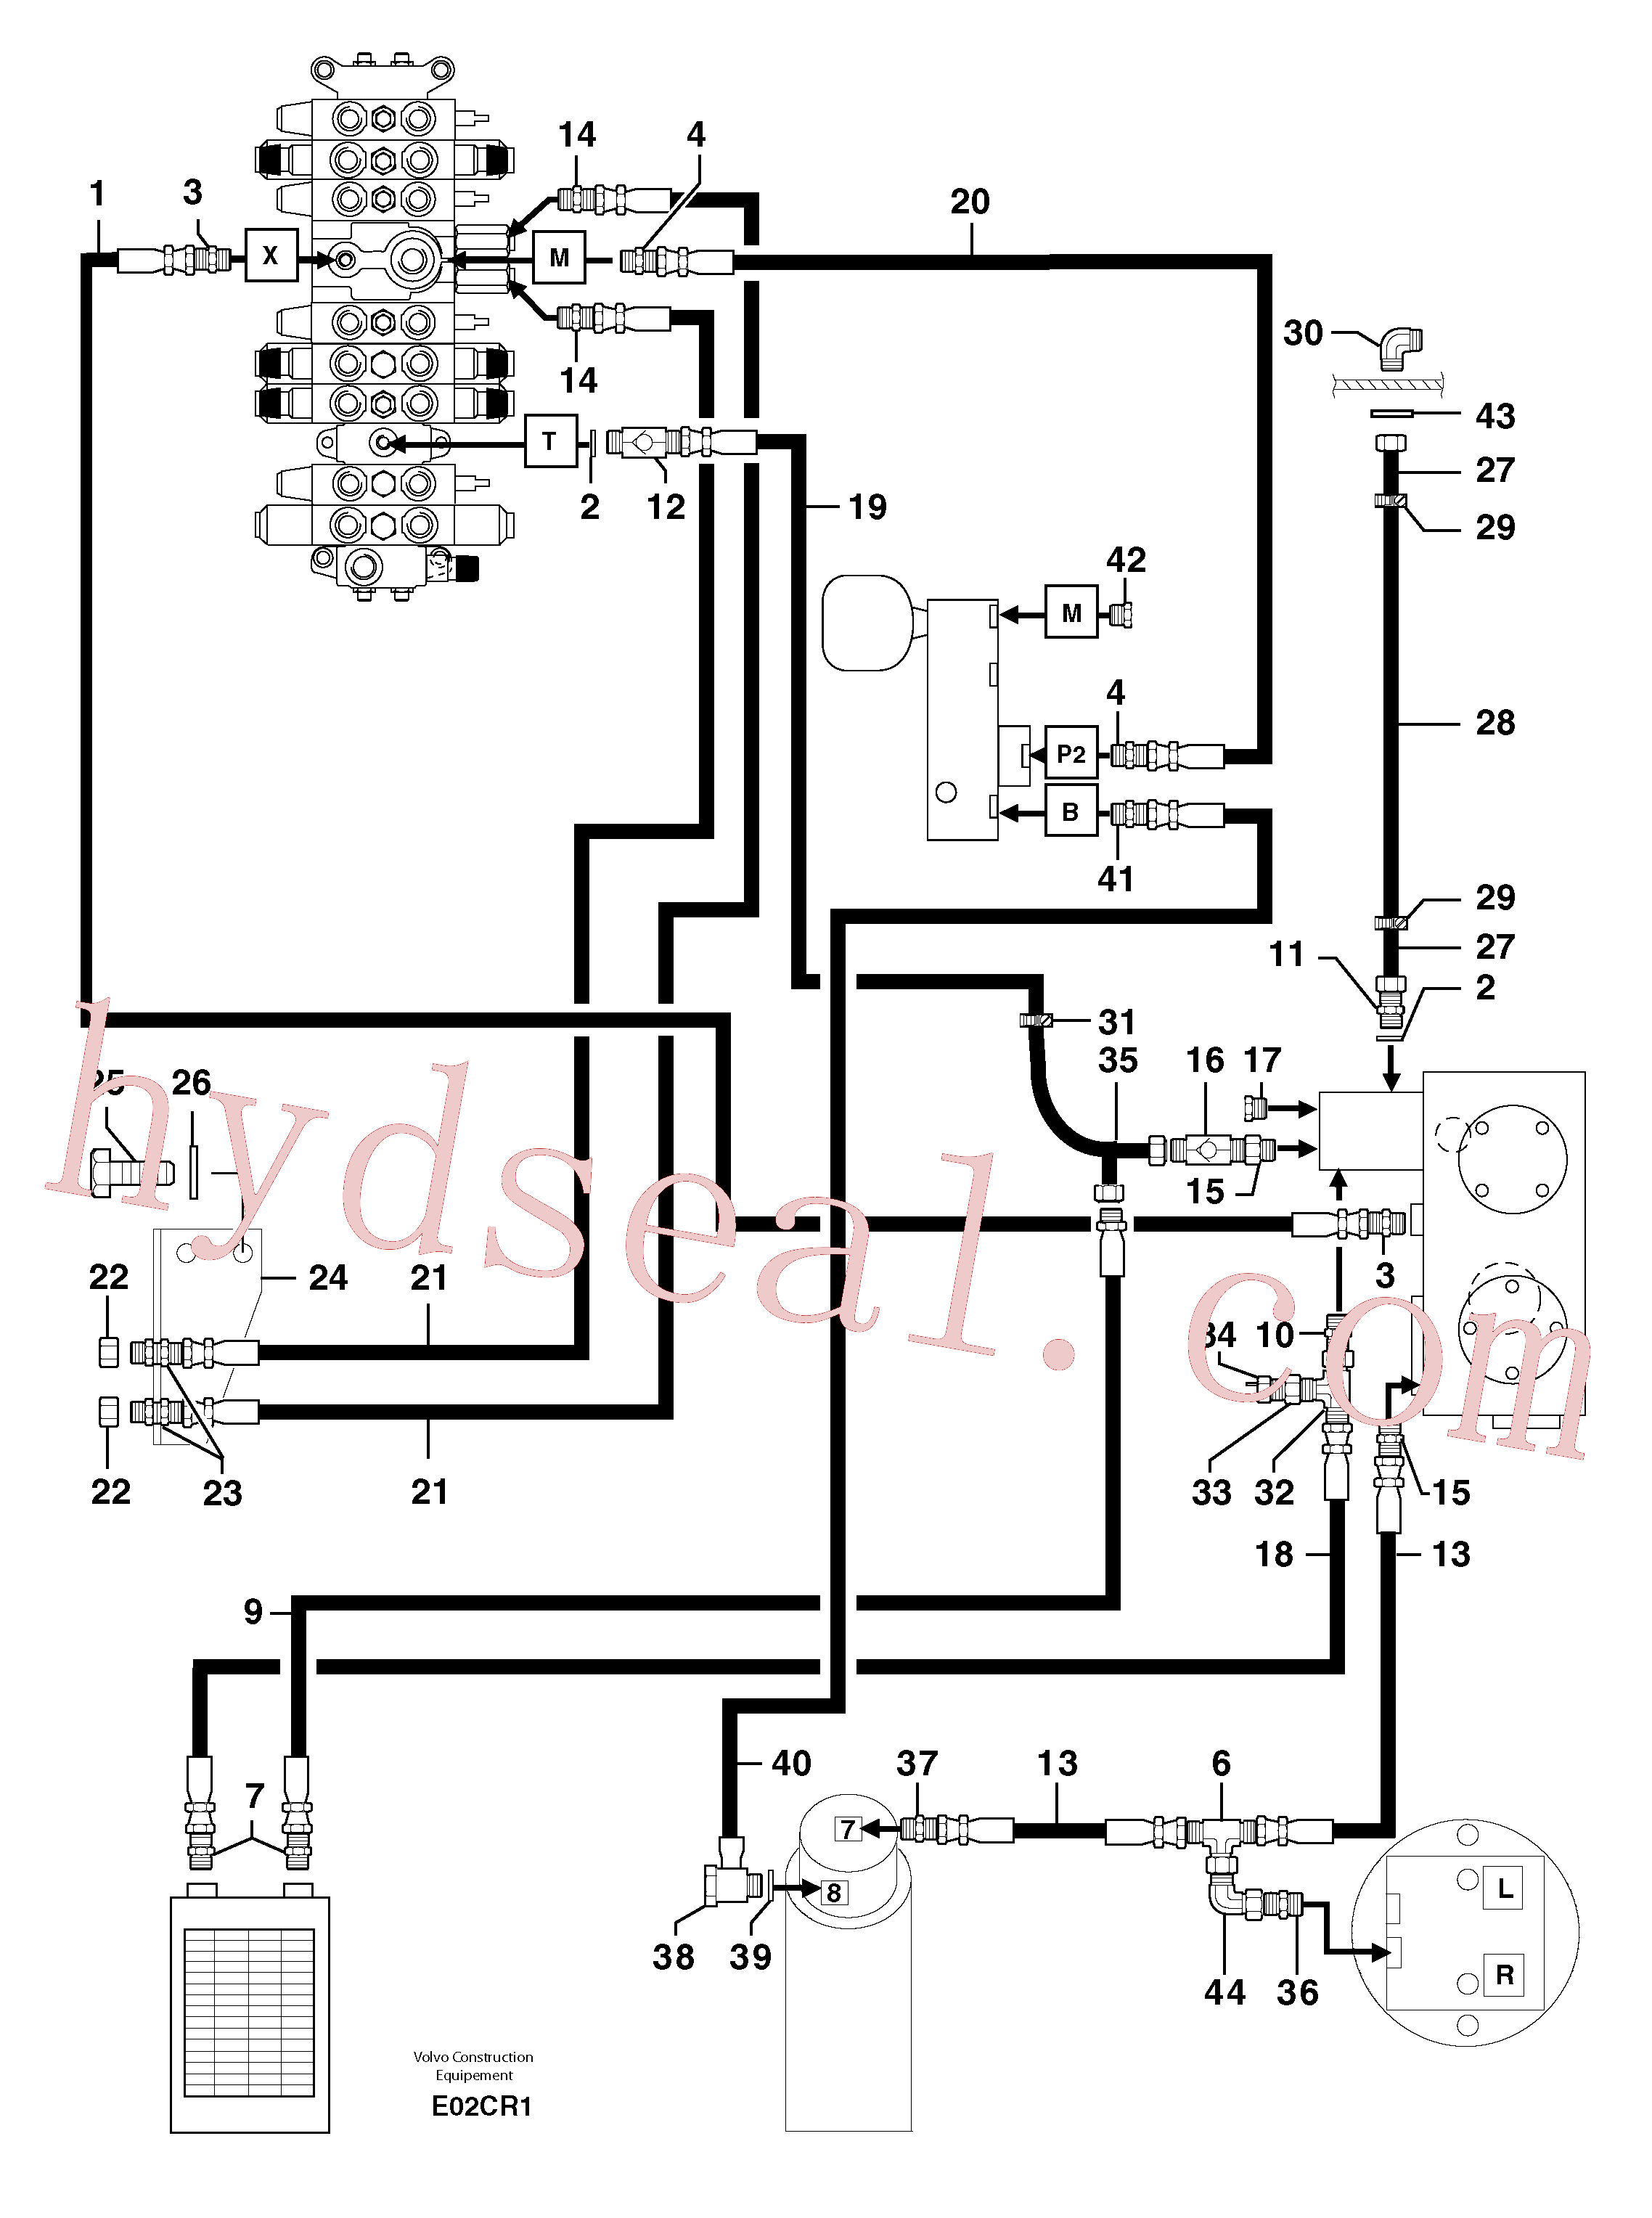 PJ4190366 for Volvo Attachments supply and return circuit(E02CR1 assembly)